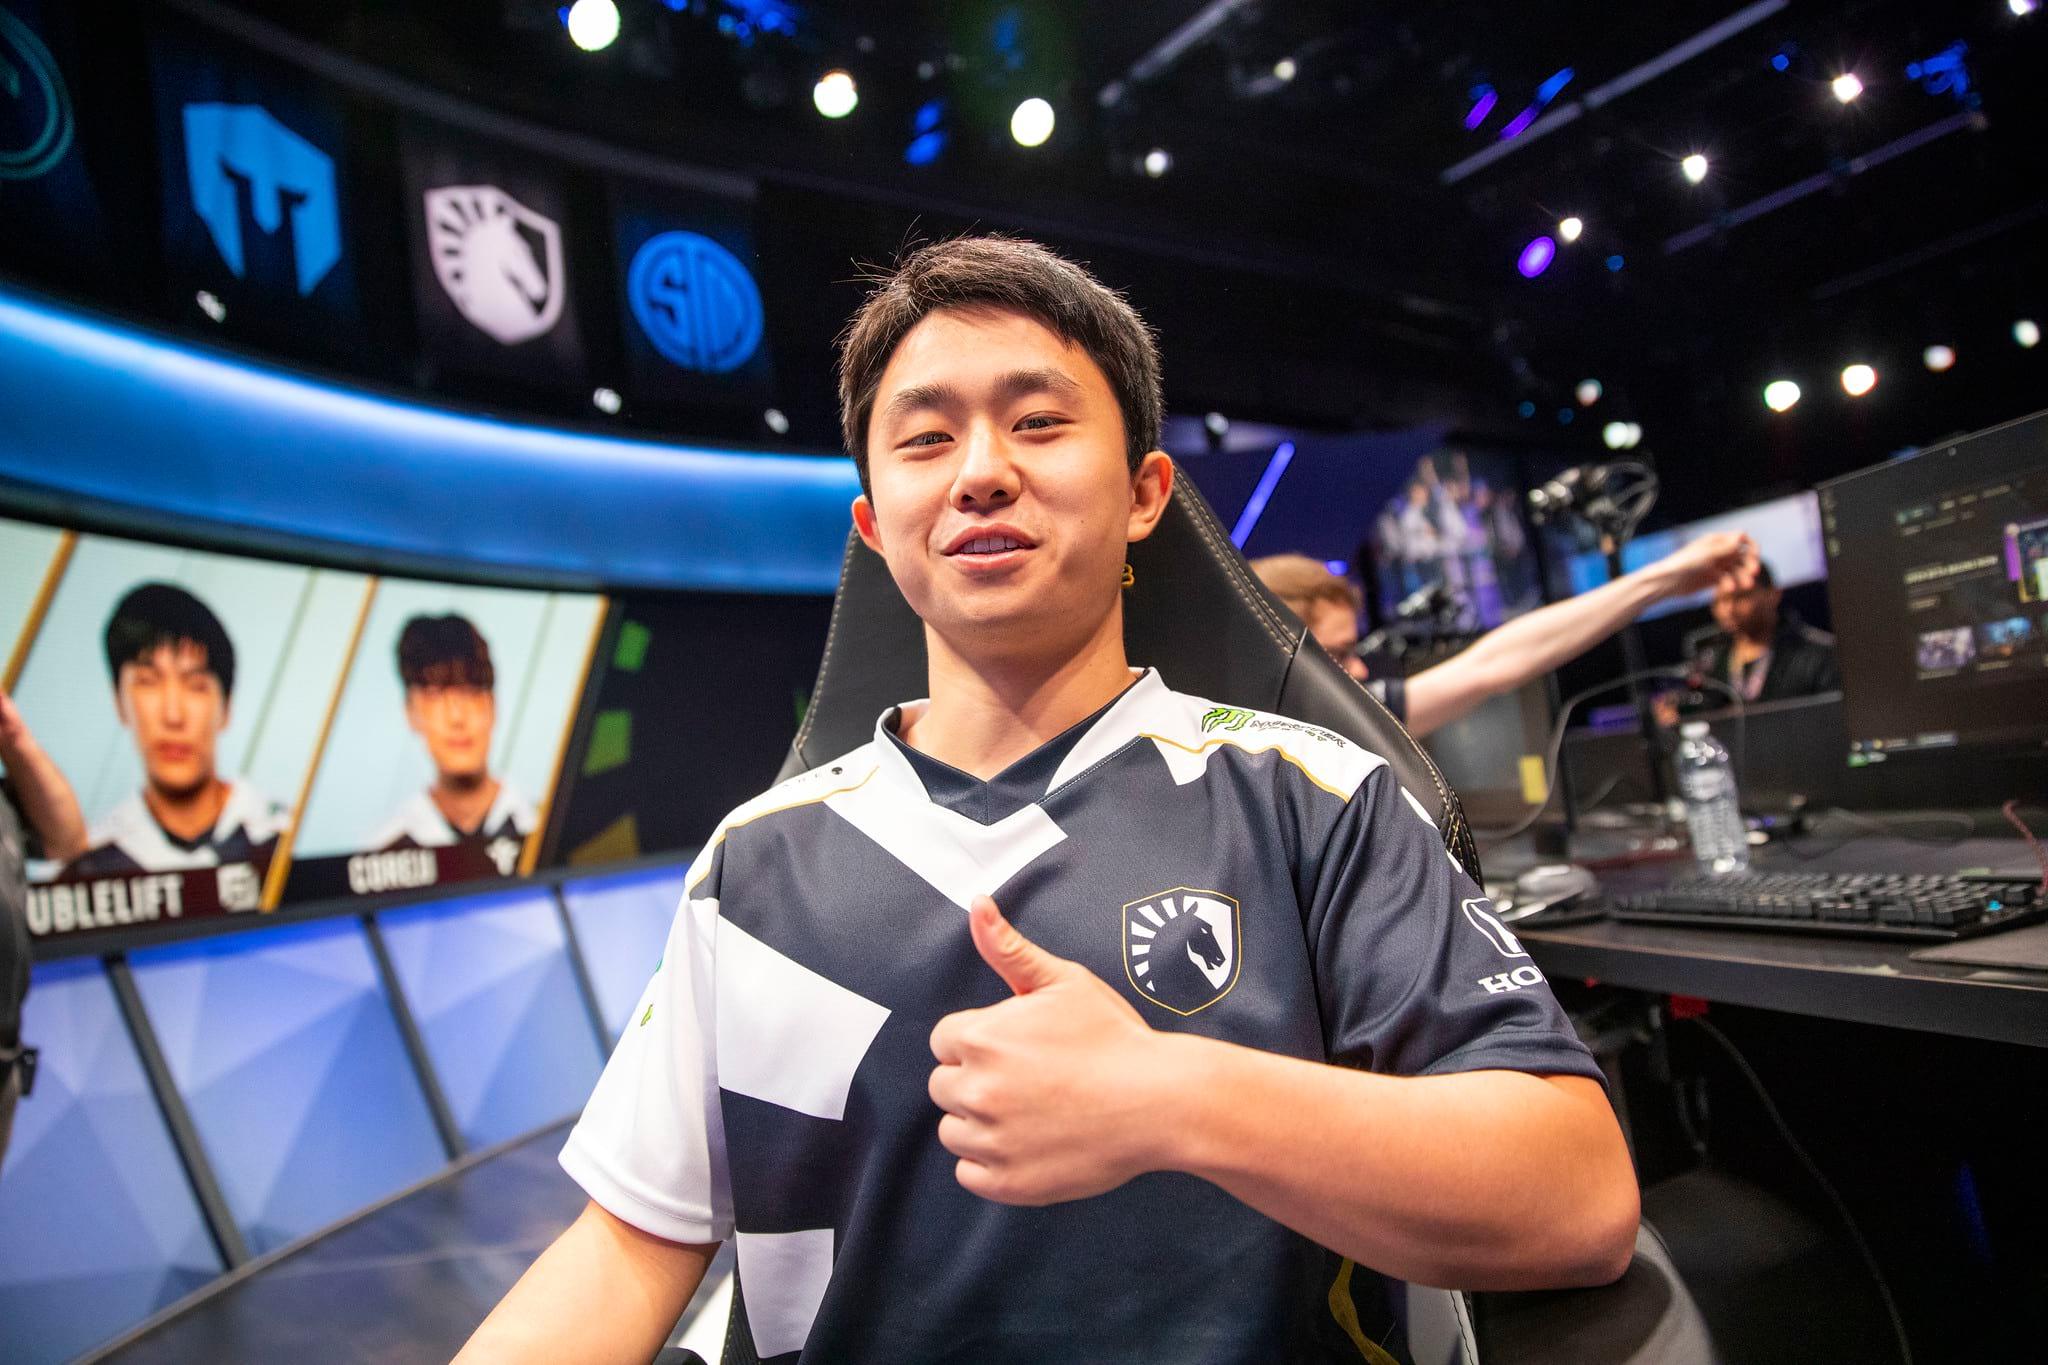 Shernfire in Team Liquid jersey at the LCS in Spring 2020.